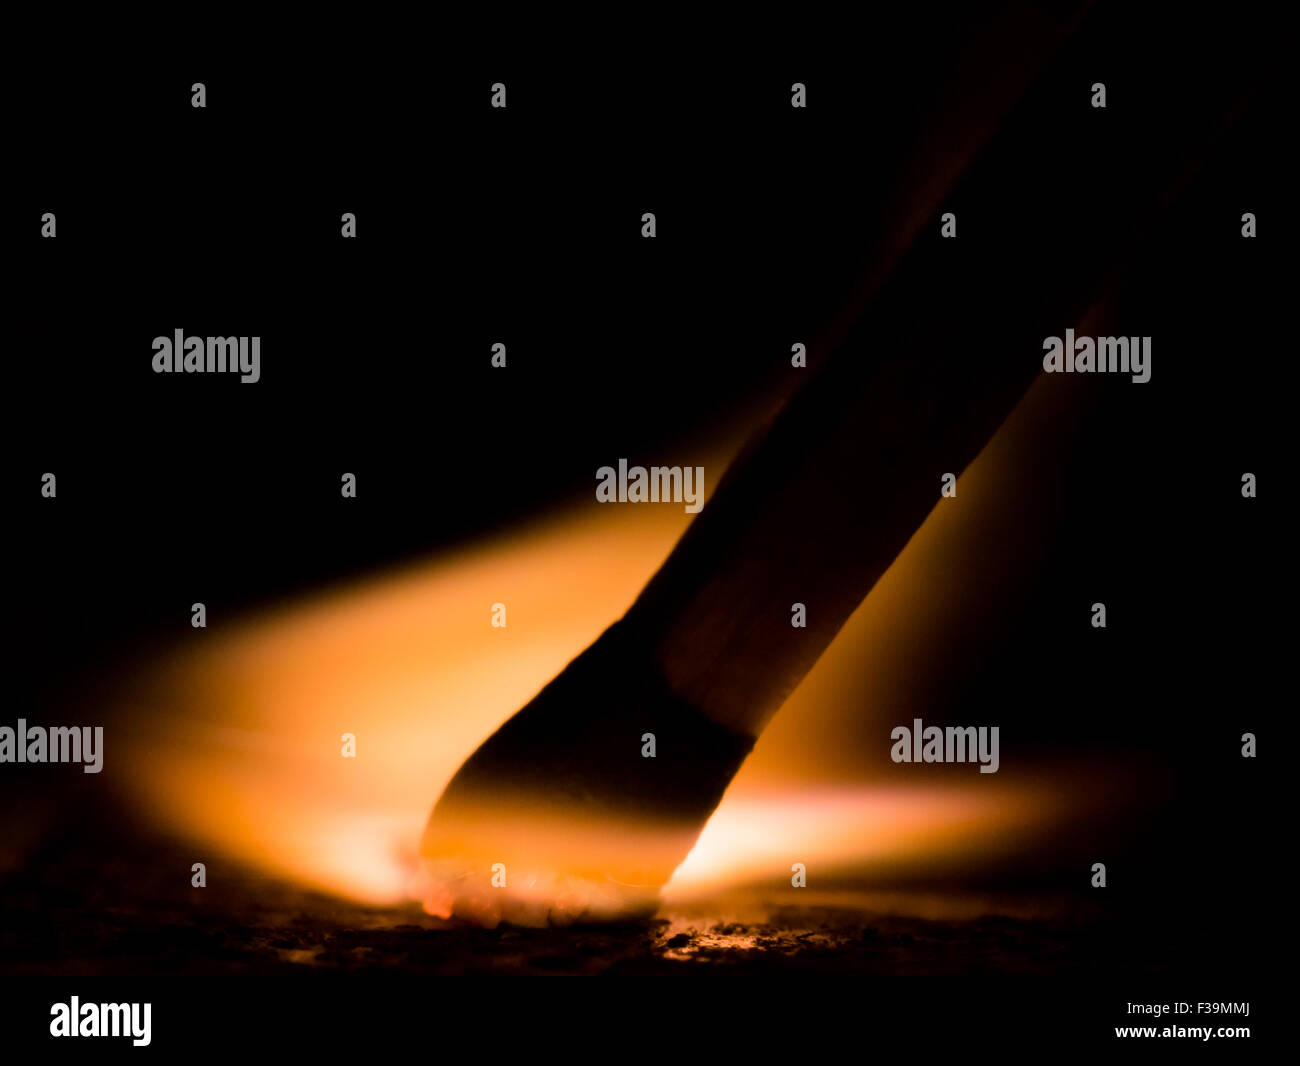 Struck Match shows motion, fire, and black background Stock Photo